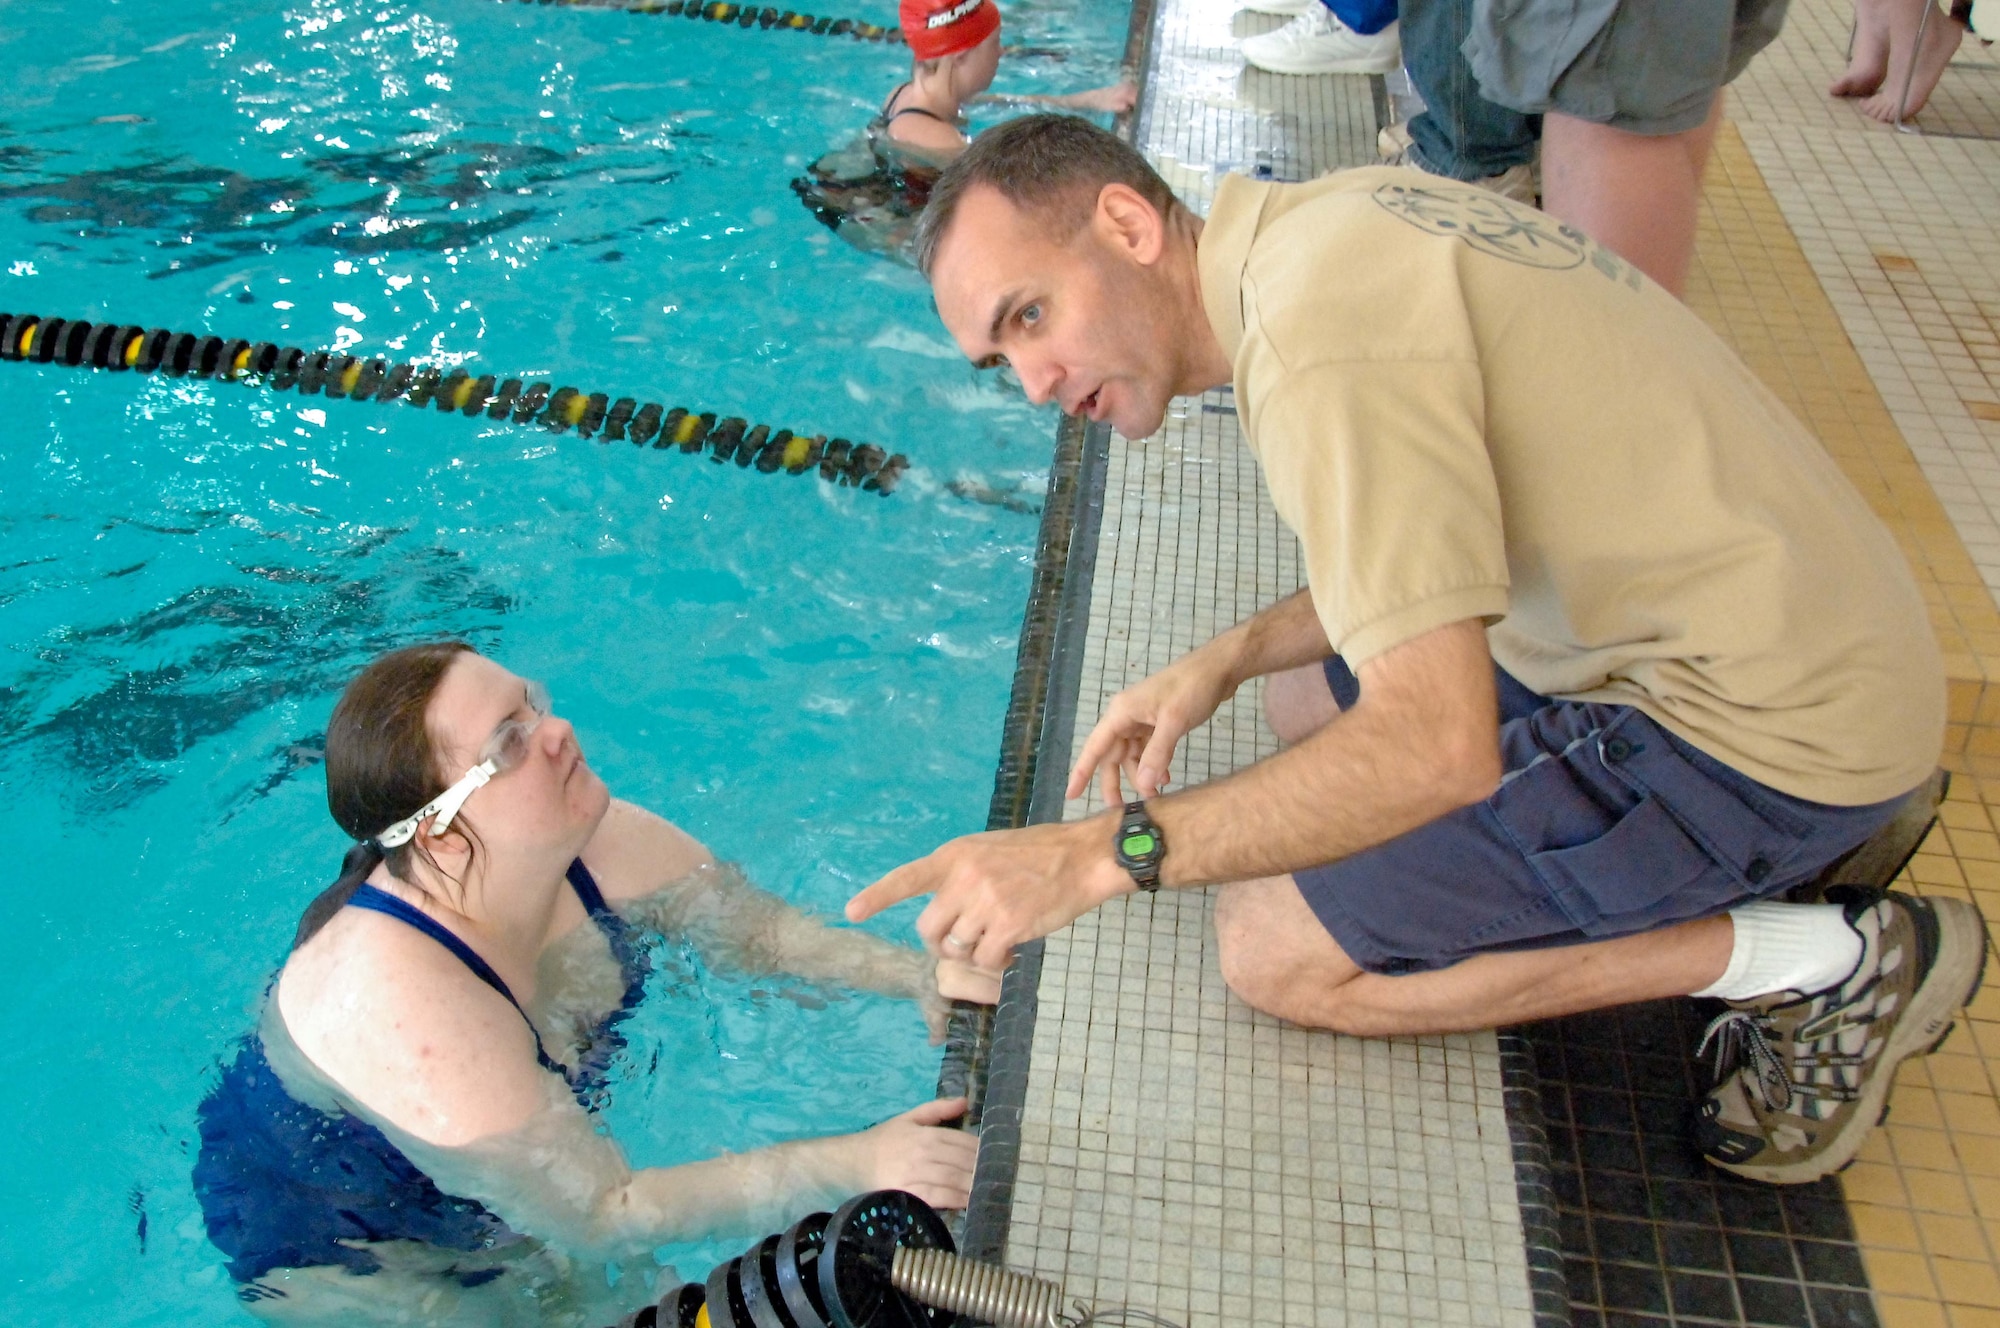 Special Olympics swimmer Tiffany Capistran, of the Montgomery Blue Marlins team, gets words of advice from Chap. (Maj.) Kleet Barclay during a swim meet at Alabama State University March 13. The staff of Gunter's Enlisted Heritage Research Institute, the Holm and Barnes Centers and the 42nd Air Base Wing volunteered their assistance for the event, which in addition to the Blue Marlins, drew swimming teams from Dothan, Mobile, Gadsden and Tuscaloosa, Ala. (U.S. Air Force photo by Donna L. Burnett)